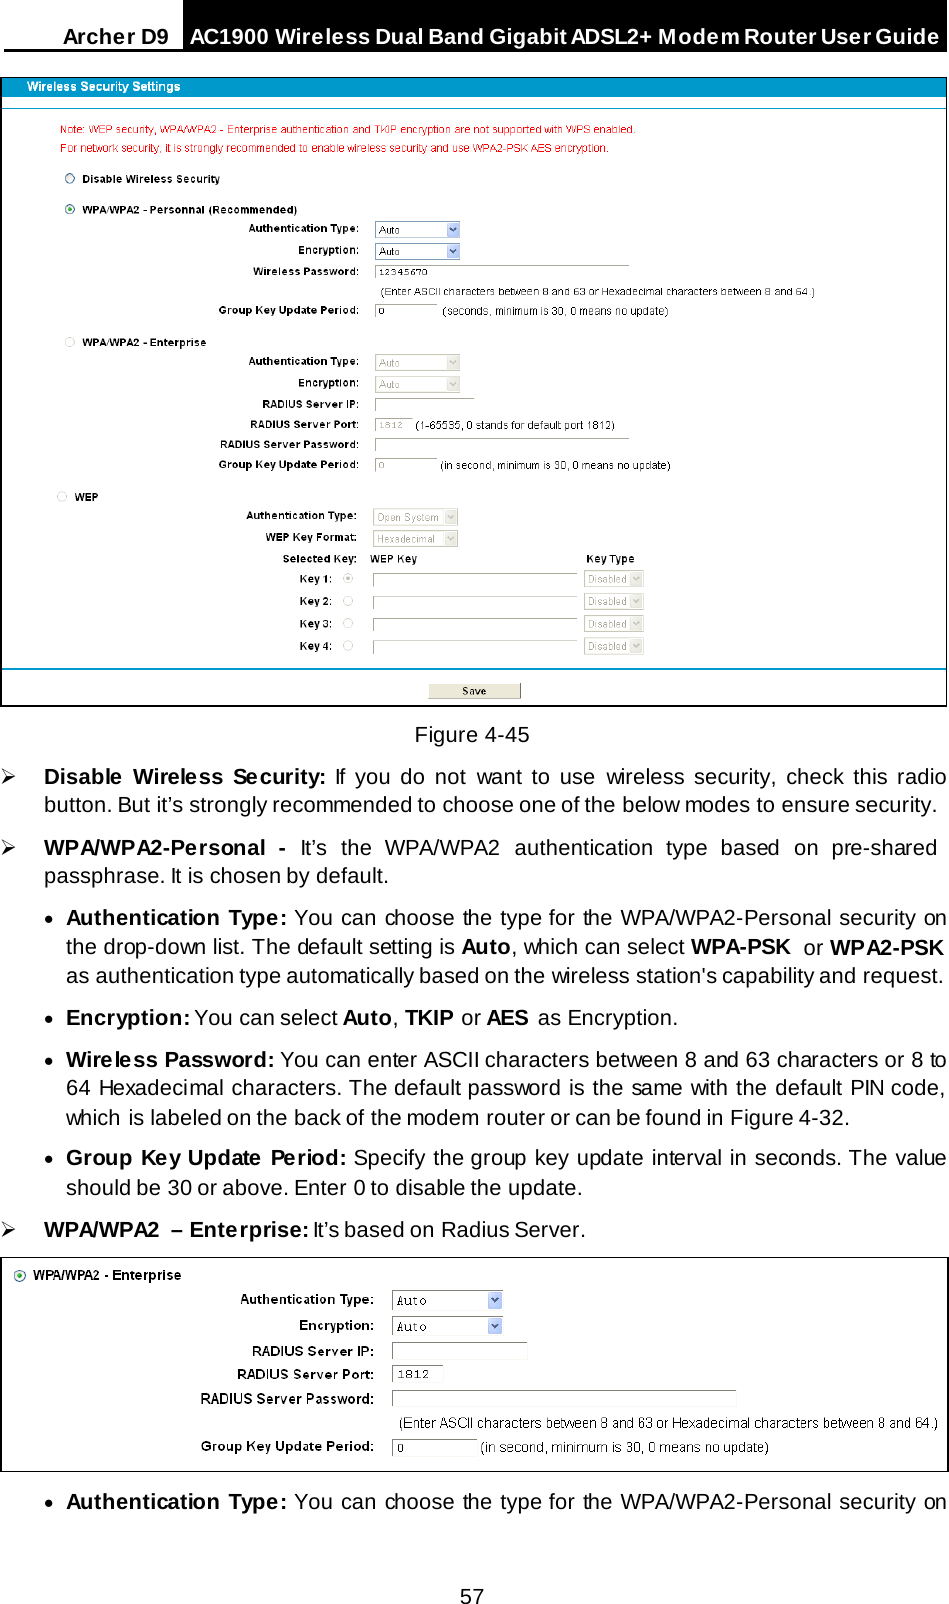 Arche r D9 AC1900 Wireless Dual Band Gigabit ADSL2+ Modem Router User Guide   Figure 4-45  Disable  Wireless Se curity: If you do not want to use wireless security, check this radio button. But it’s strongly recommended to choose one of the below modes to ensure security.  WPA/WPA2-Personal  - It’s  the  WPA/WPA2 authentication type based  on pre-shared passphrase. It is chosen by default. • Authentication Type: You can choose the type for the WPA/WPA2-Personal security on the drop-down list. The default setting is Auto, which can select WPA-PSK or WPA2-PSK as authentication type automatically based on the wireless station&apos;s capability and request. • Encryption: You can select Auto, TKIP or AES as Encryption. • Wireless Password: You can enter ASCII characters between 8 and 63 characters or 8 to 64 Hexadecimal characters. The default password is the same with the default PIN code, which is labeled on the back of the modem router or can be found in Figure 4-32. • Group Key Update Period: Specify the group key update interval in seconds. The value should be 30 or above. Enter 0 to disable the update.  WPA/WPA2  – Enterprise: It’s based on Radius Server.  • Authentication Type: You can choose the type for the WPA/WPA2-Personal security on 57 